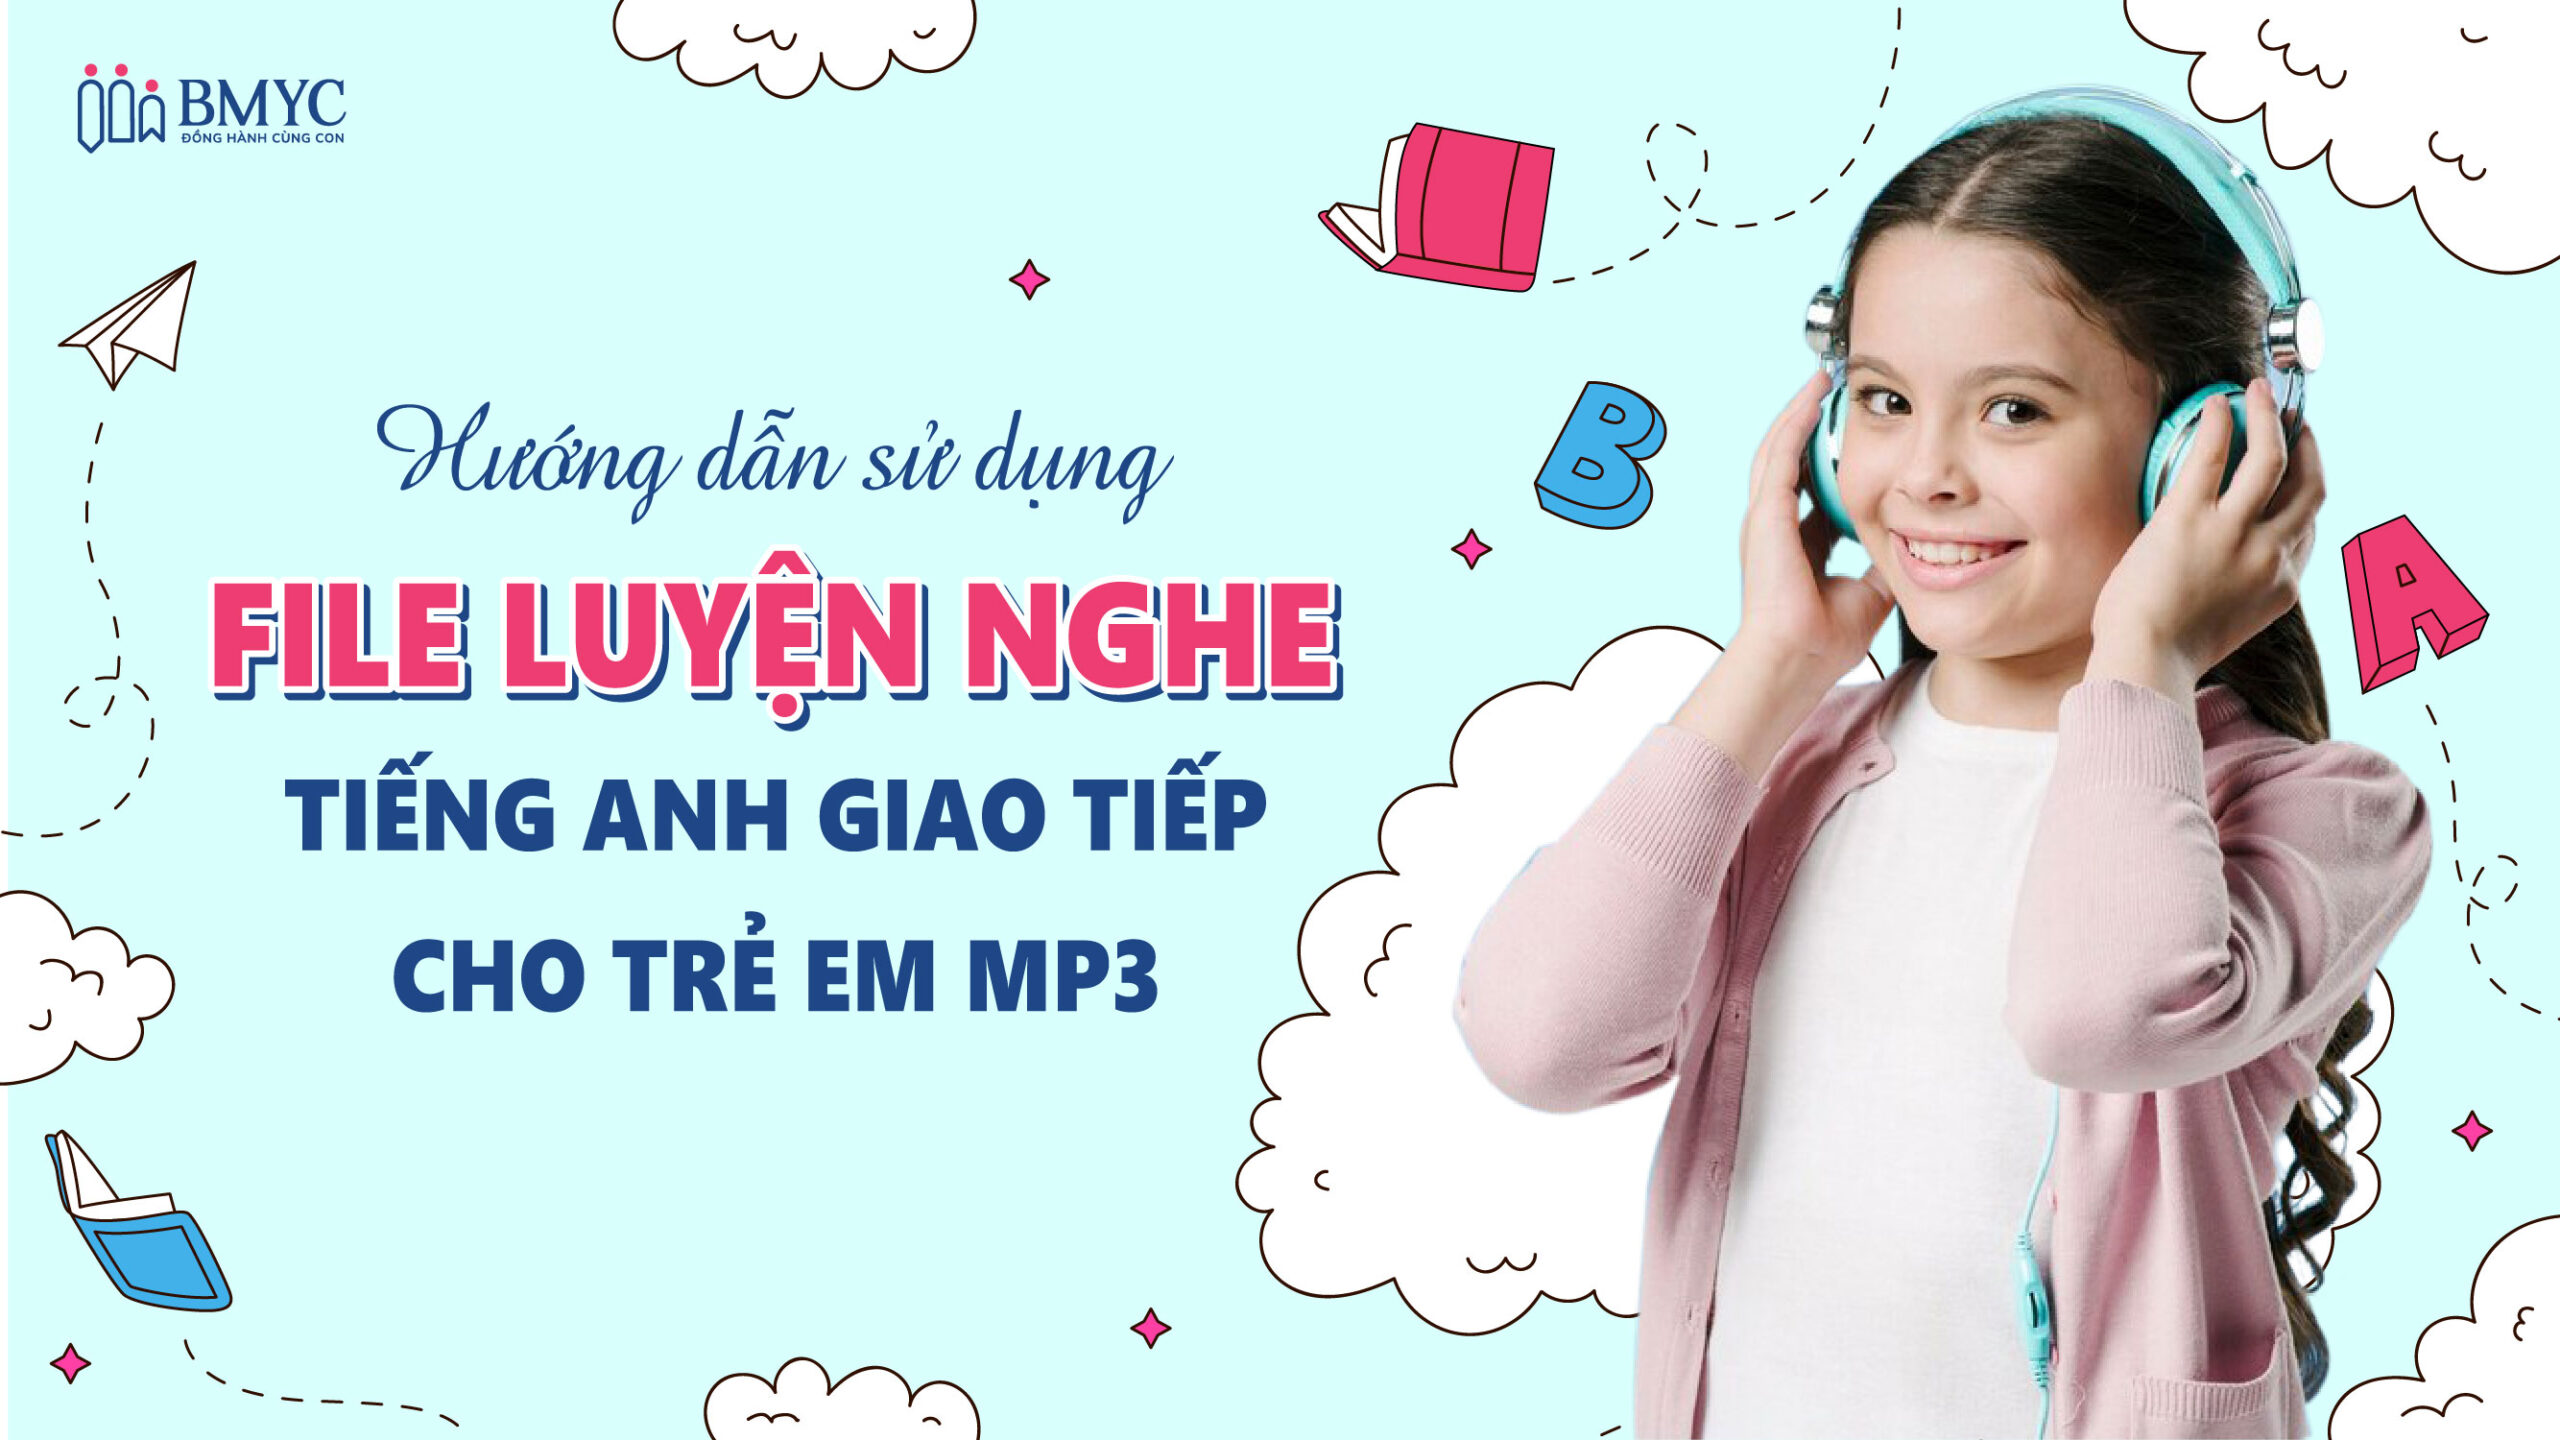 File luyện nghe tiếng Anh giao tiếp cho trẻ em mp3